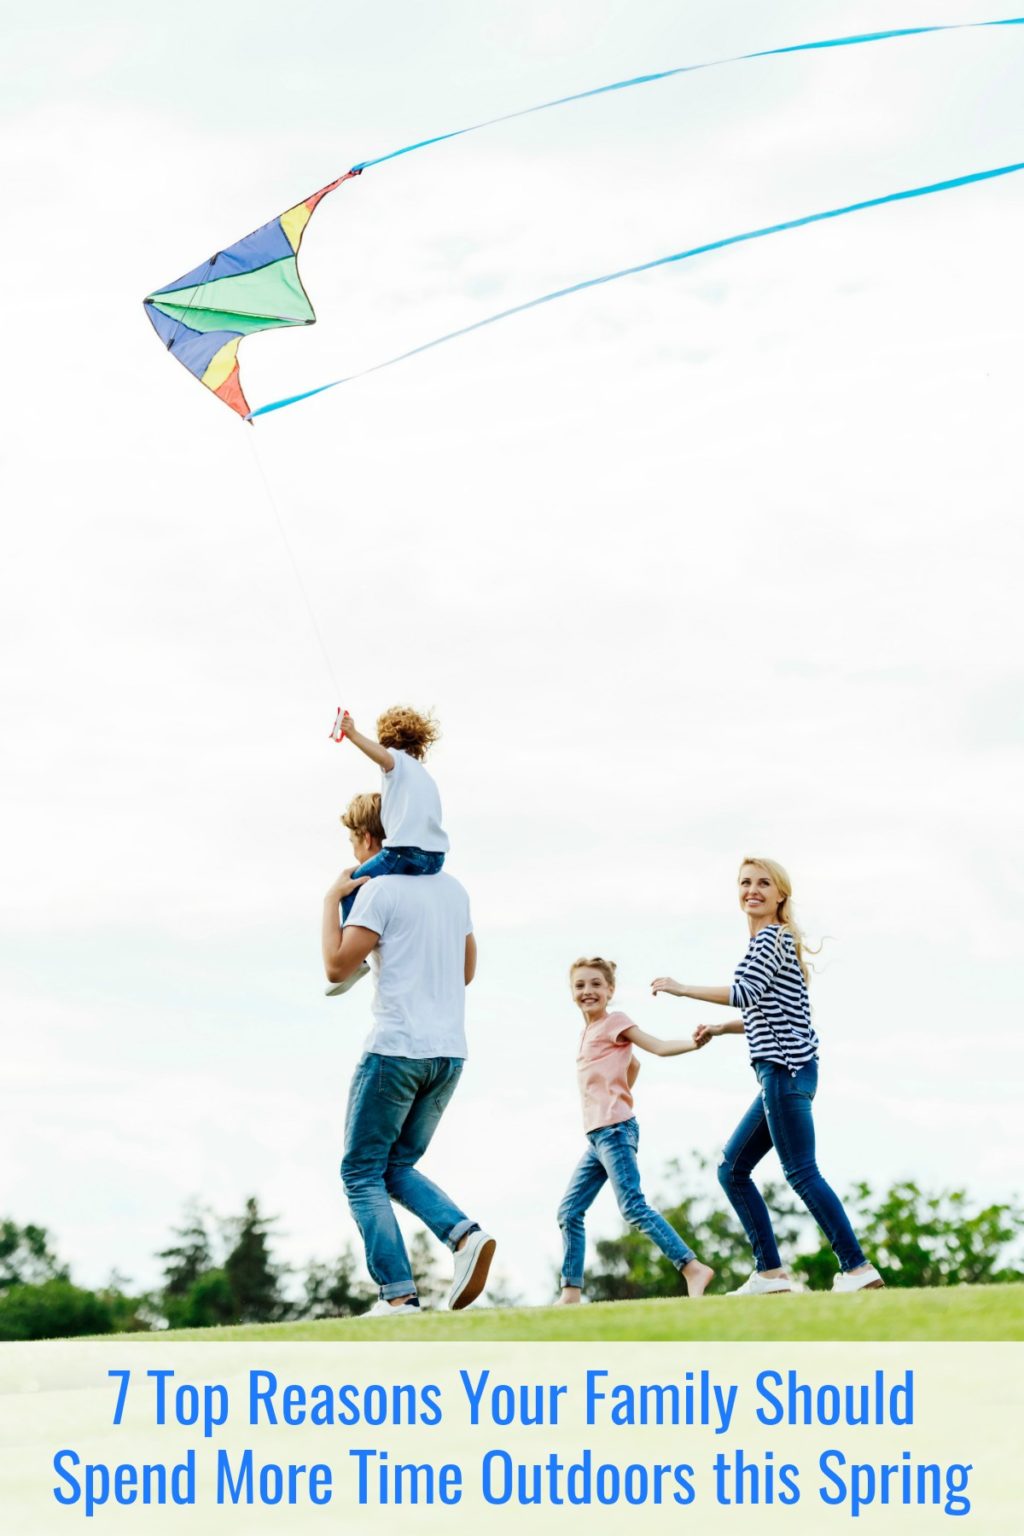 Get your kids off the devices and back outside with these 7 Top Reasons Your Family Should Spend More Time Outdoors this Spring.